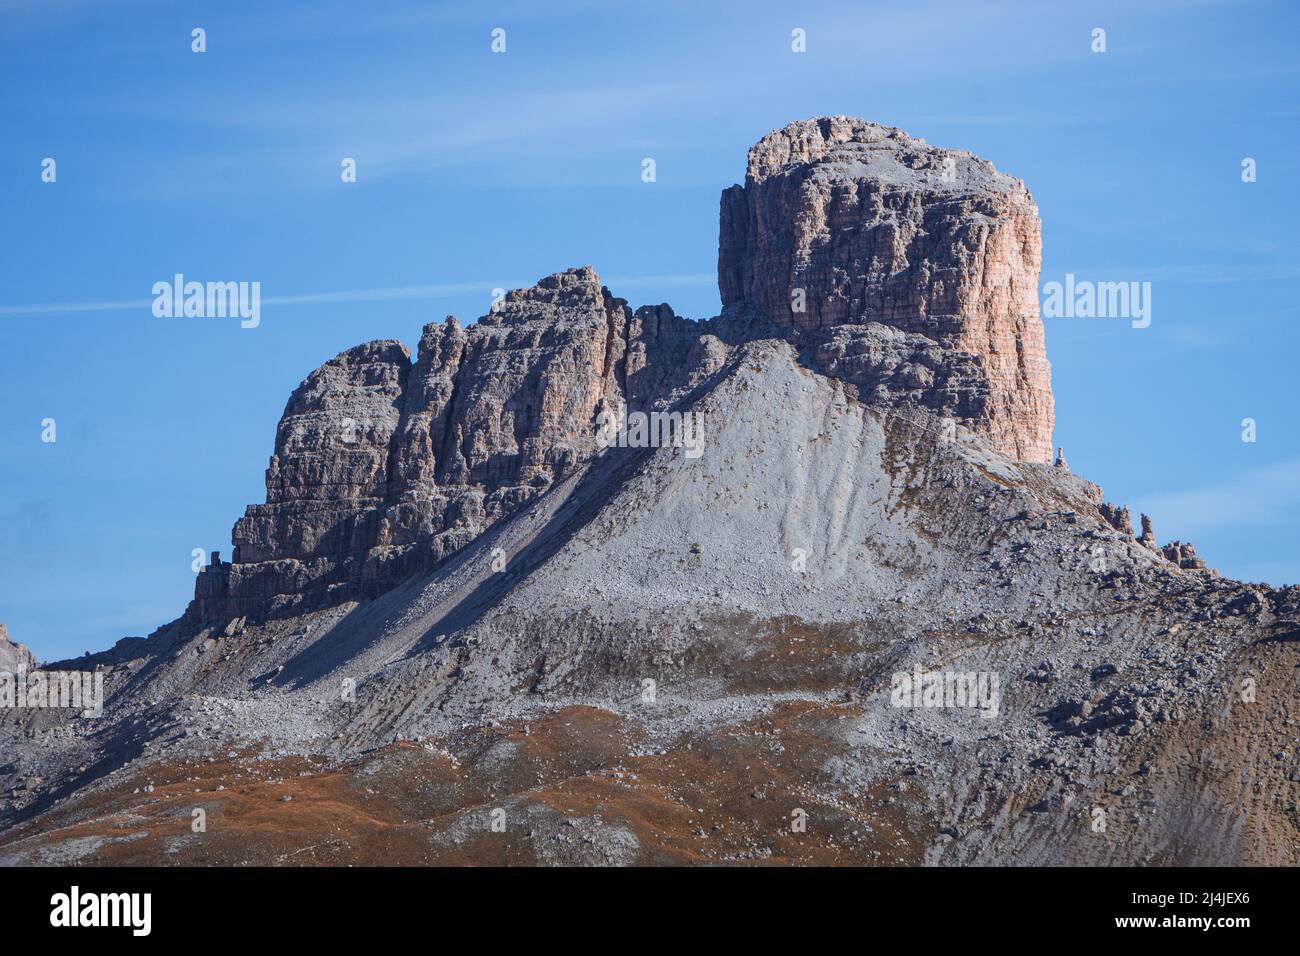 The breathtaking landscapes of the Dolomites during a beautiful early autumn morning, near the town of Auronzo di Cadore, Italy - October 2021. Stock Photo